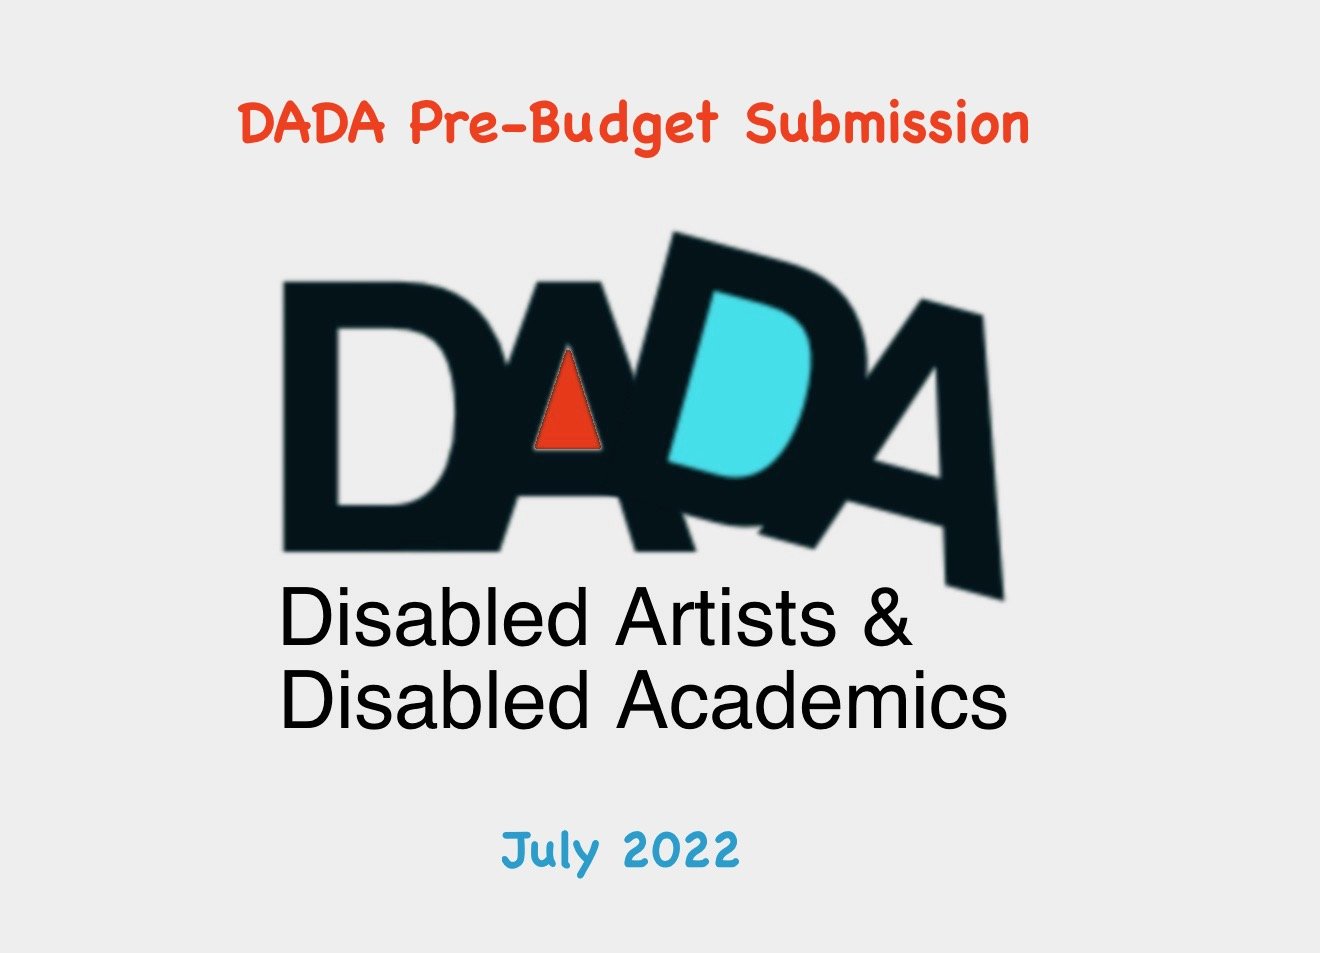 DADA Pre-Budget Submission 2022